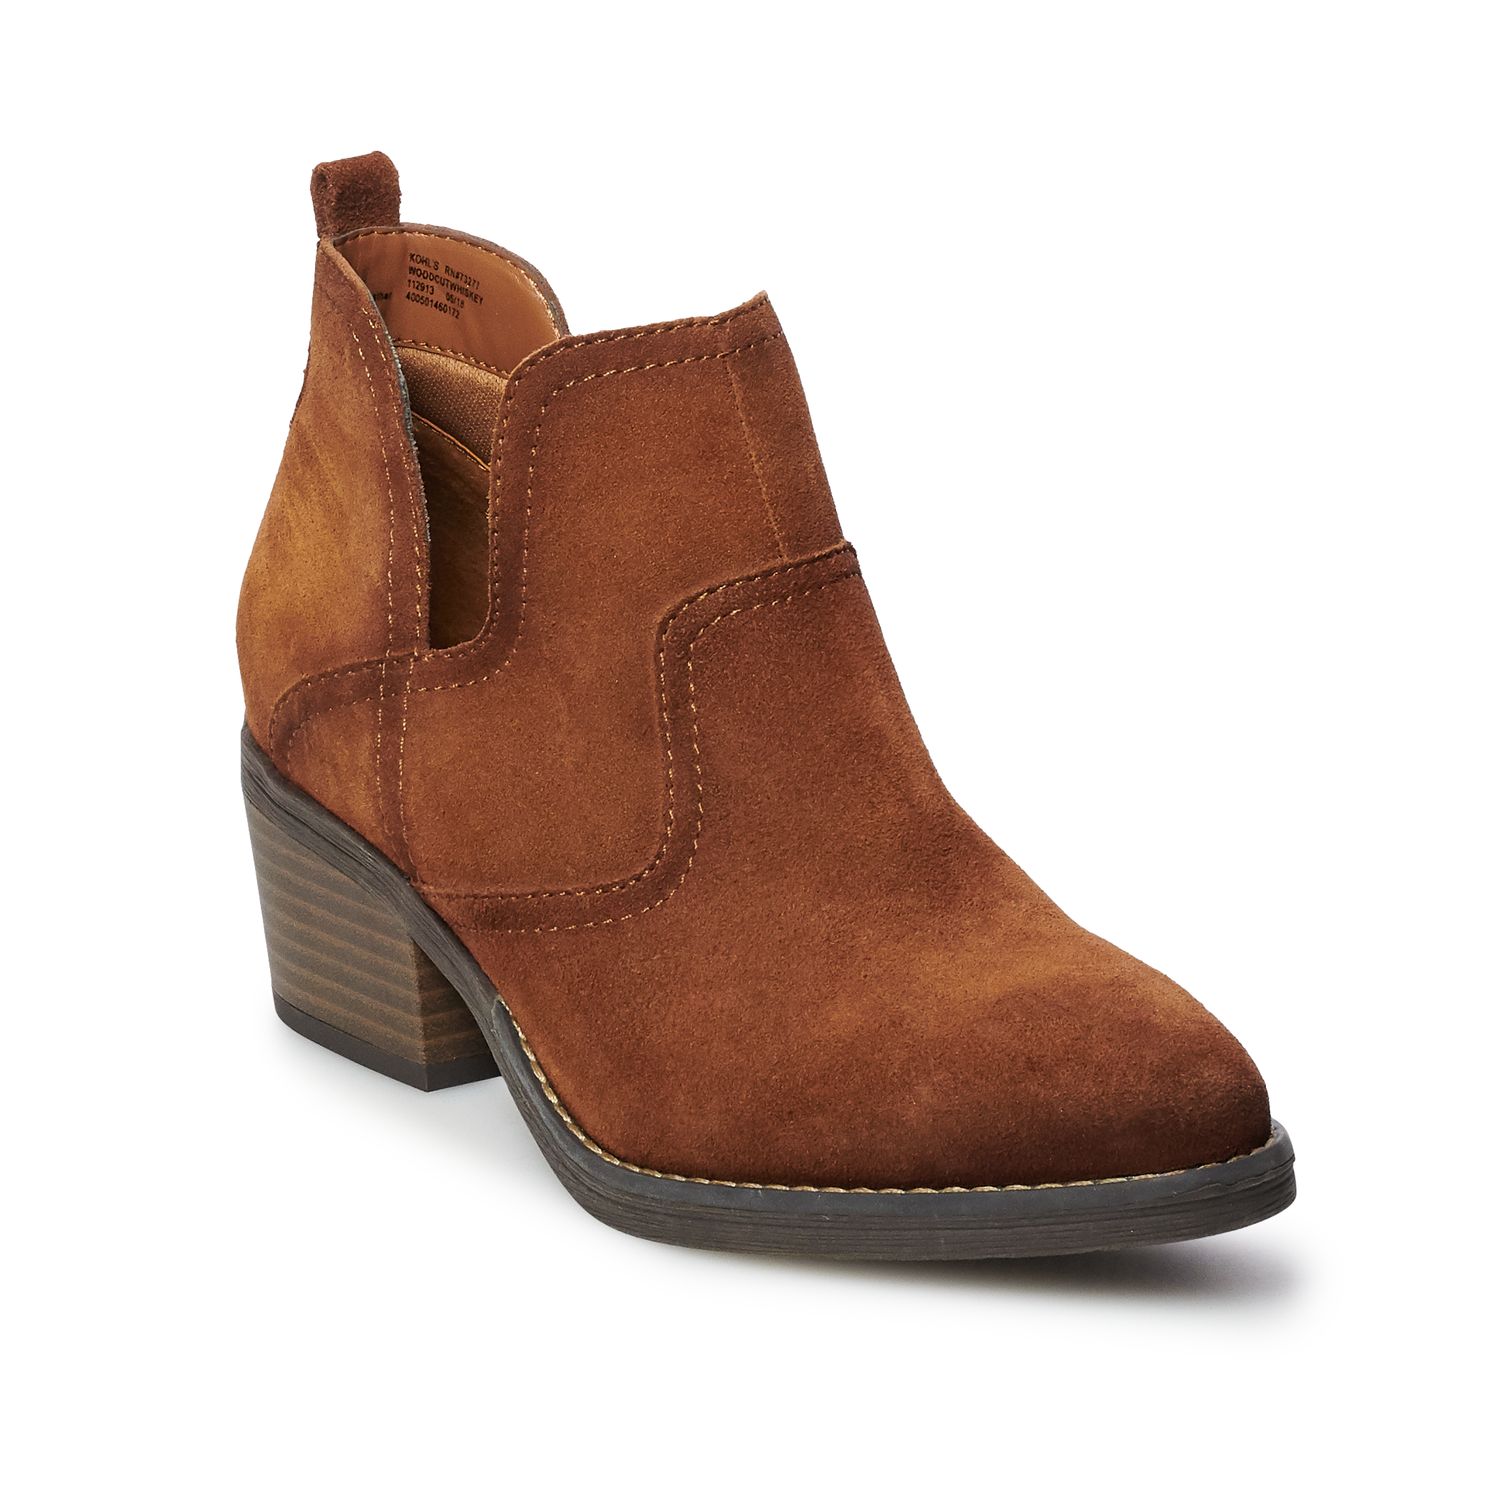 Woodcut Women's Suede Ankle Boots